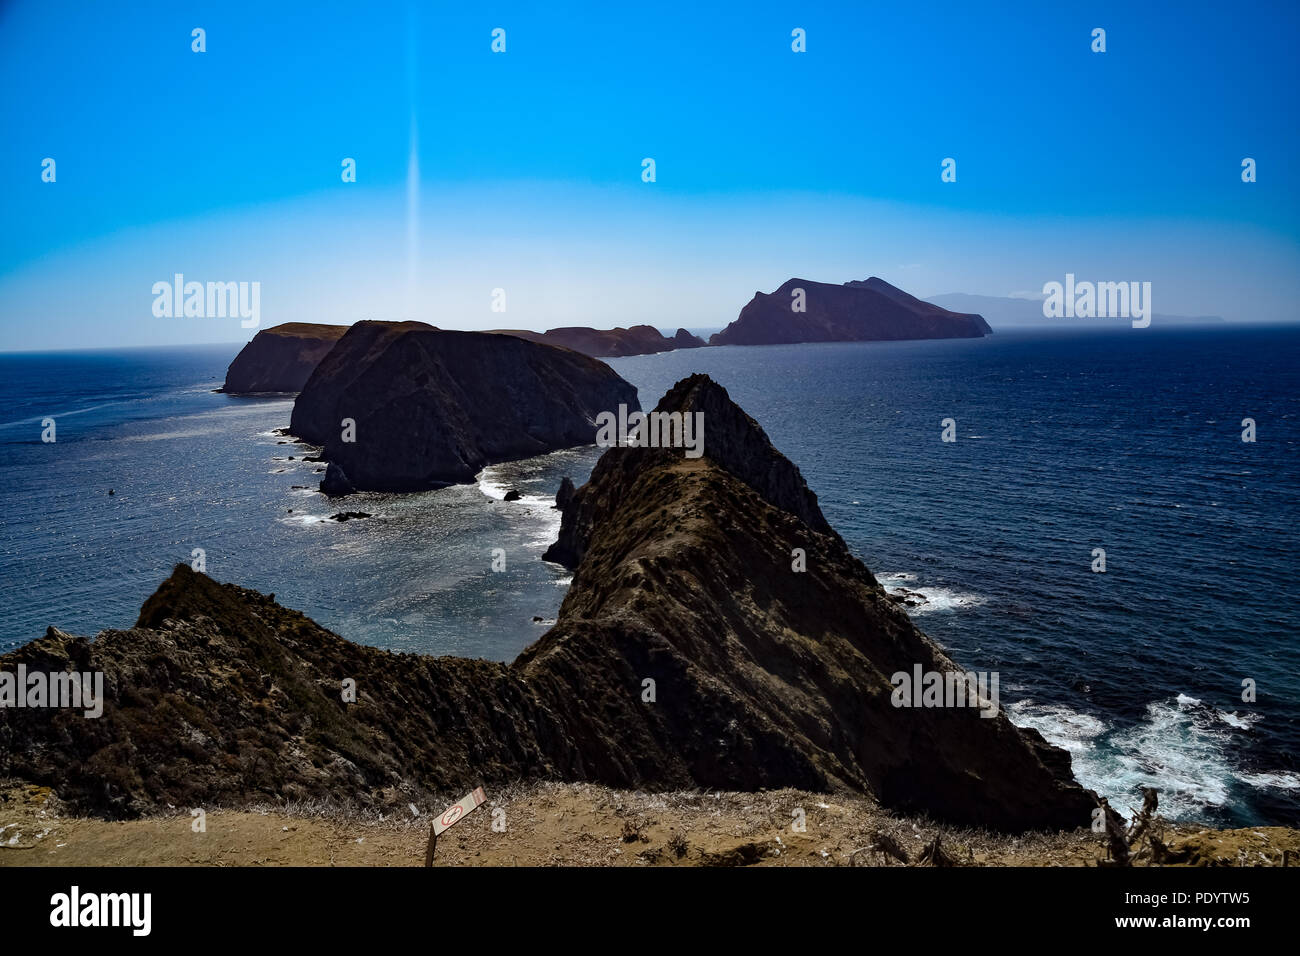 Vista from the magnificent Inspiration Point on Anacapa Island in the Channel Islands National Park off the coast of Ventura, California Stock Photo